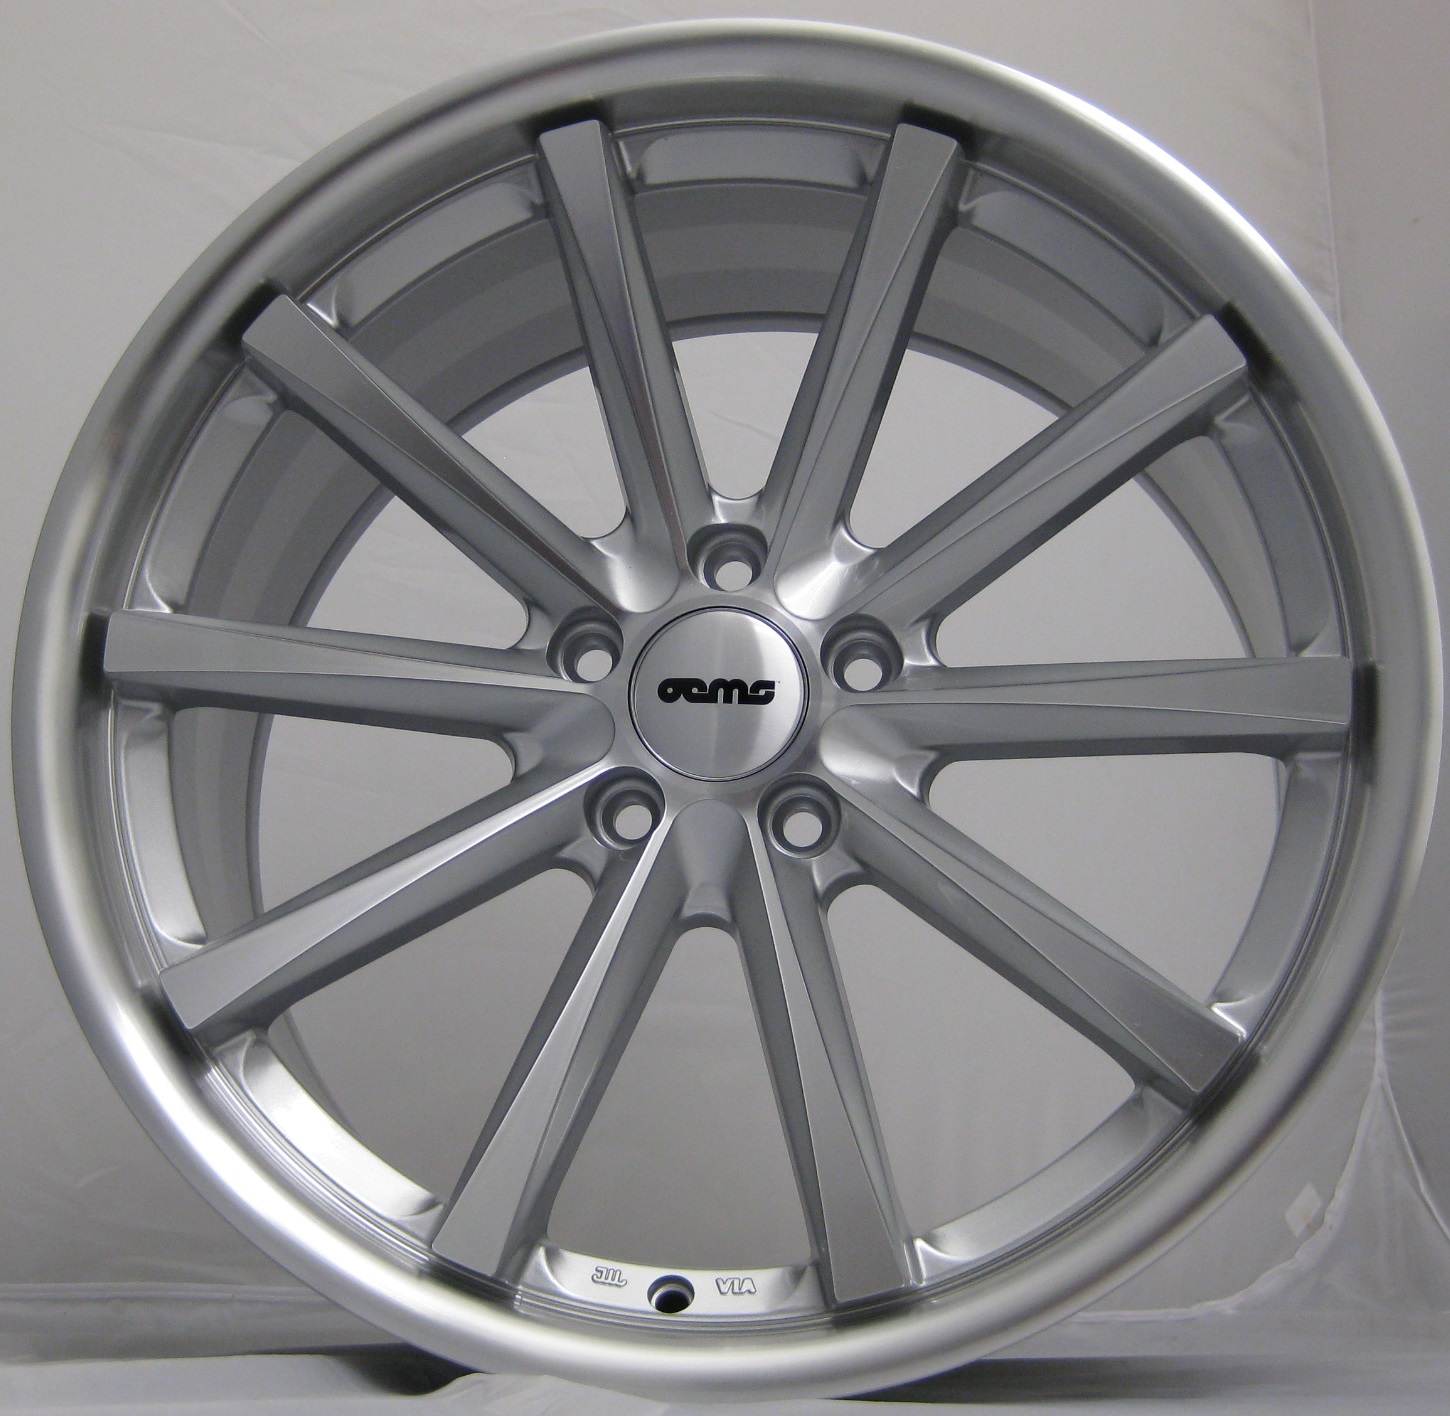 NEW 19  OEMS 110 CONCAVED ALLOYS IN SILVER WITH POLISHED DISH  WIDER 9 5  REAR et35 33